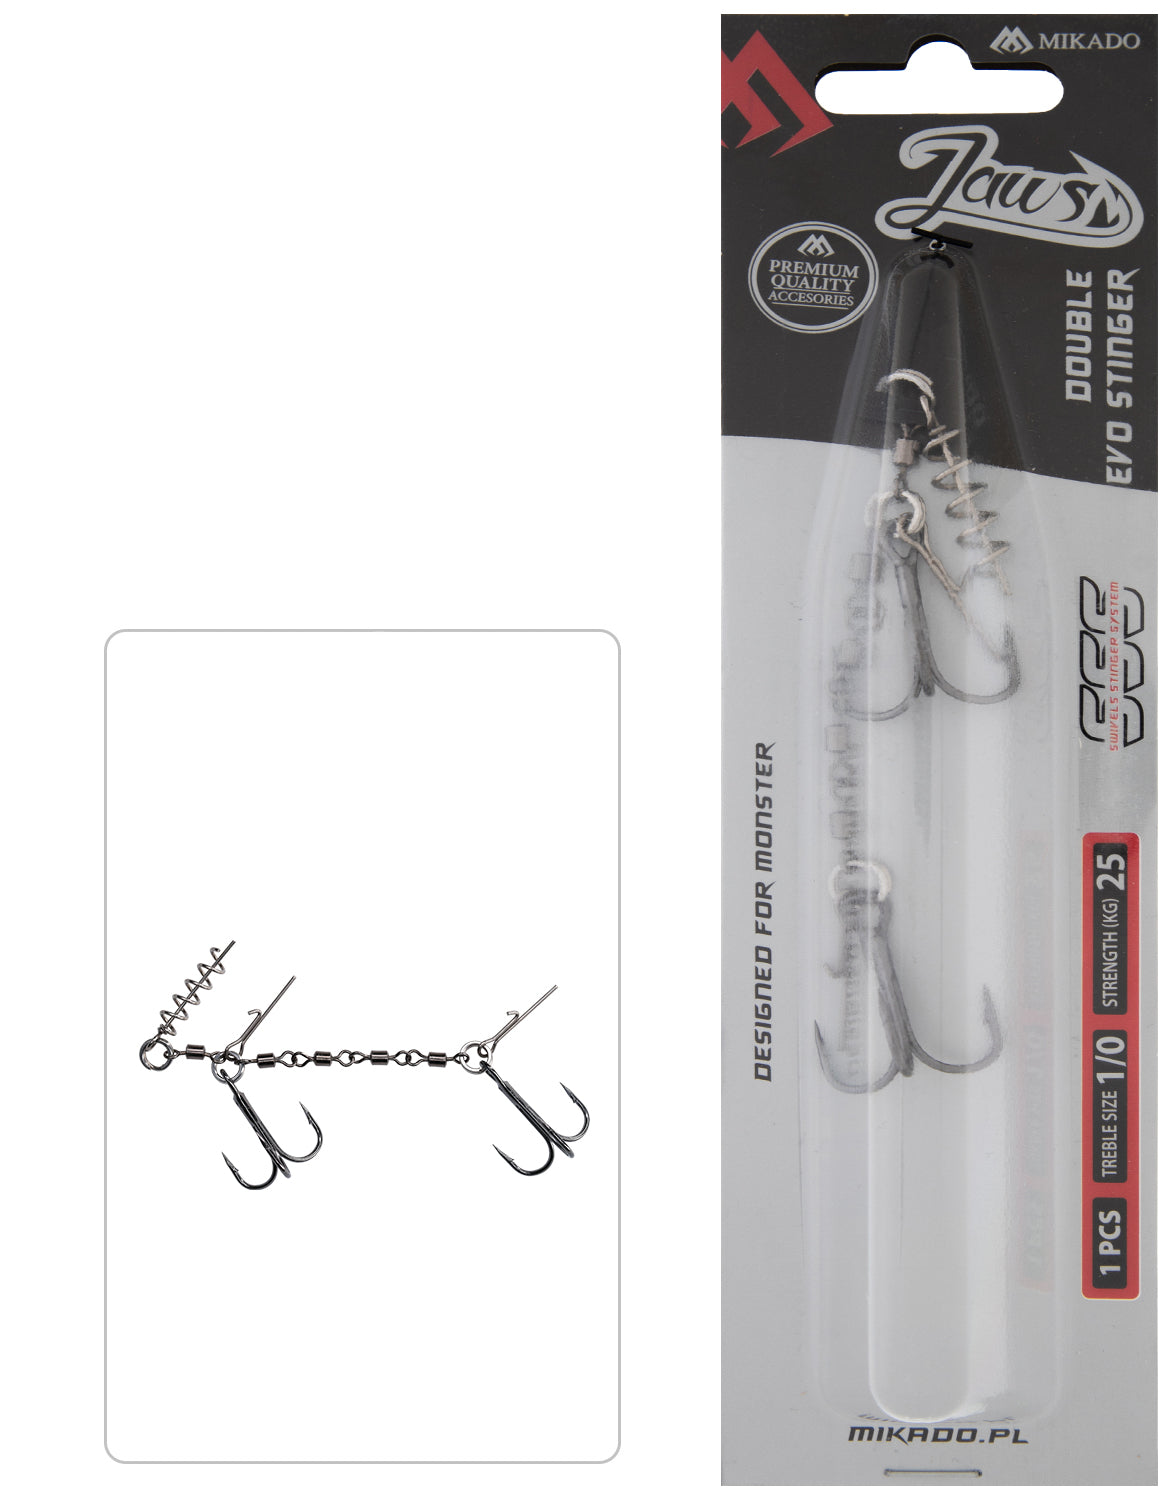 Fox Rage Single Hook Stingers - All Sizes - Mill View Fishing Tackle